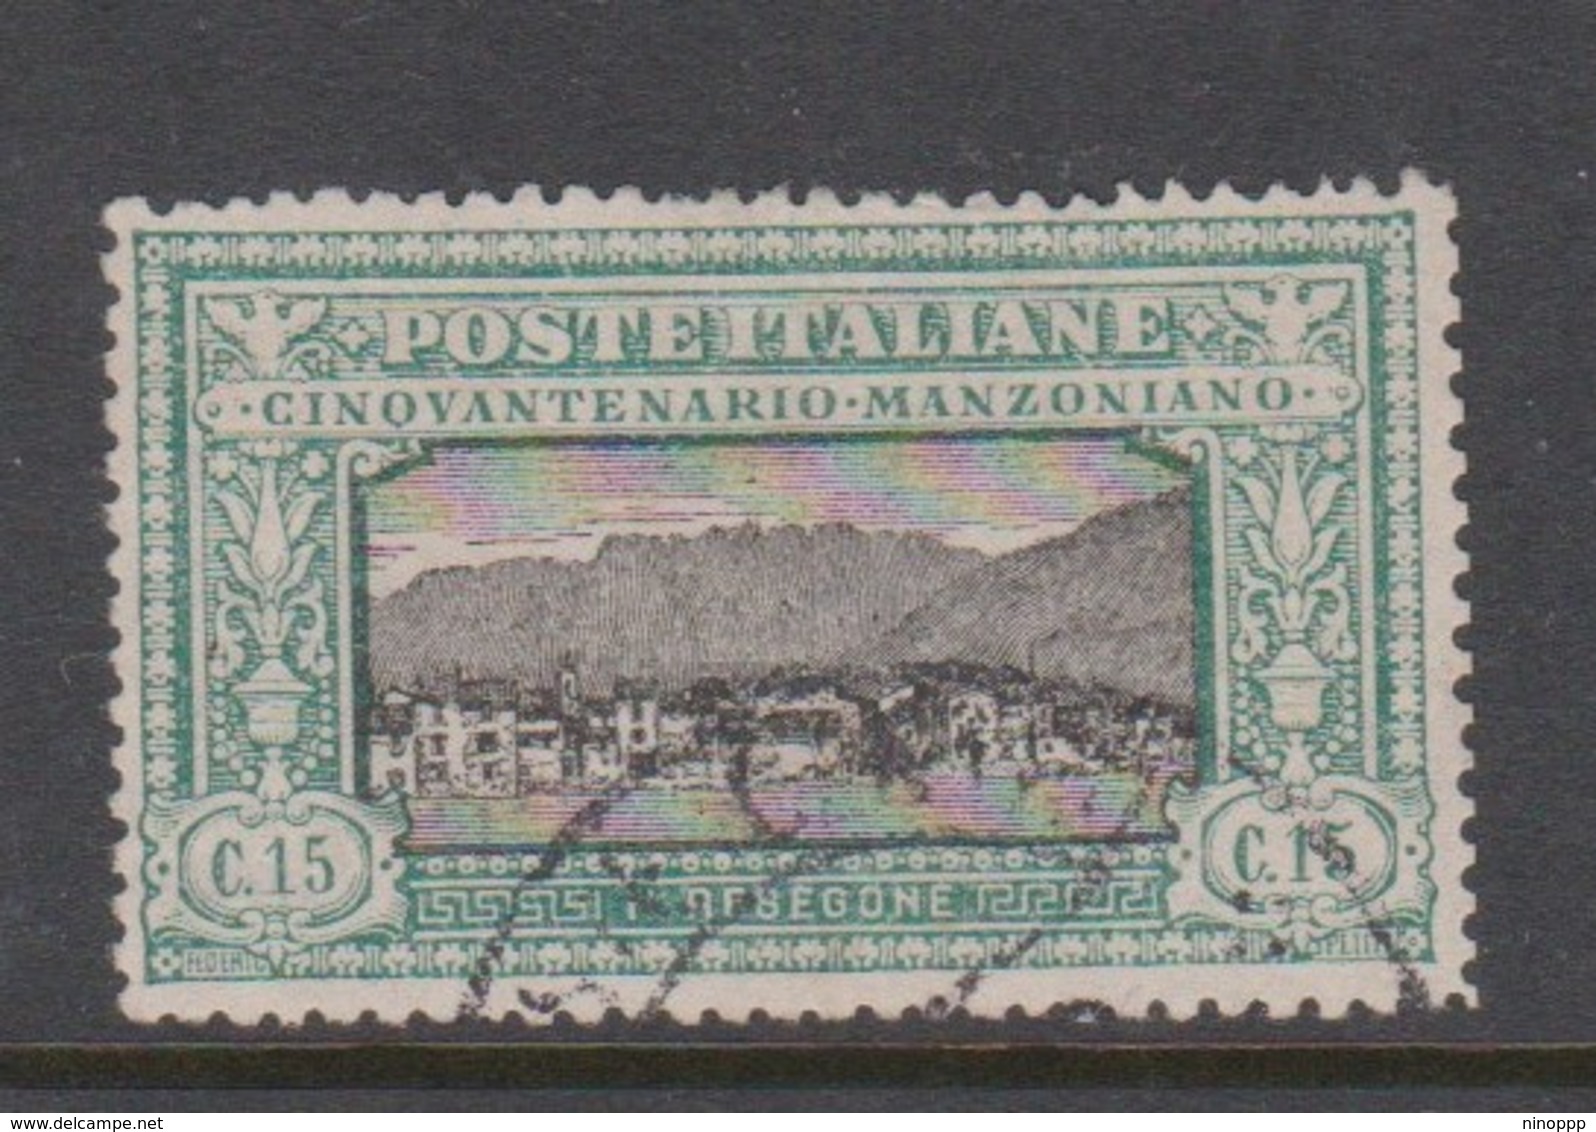 Italy S 152 1923 50th Anniversary Death Of Manzoni, 15c Green And Black, Used - Gebraucht